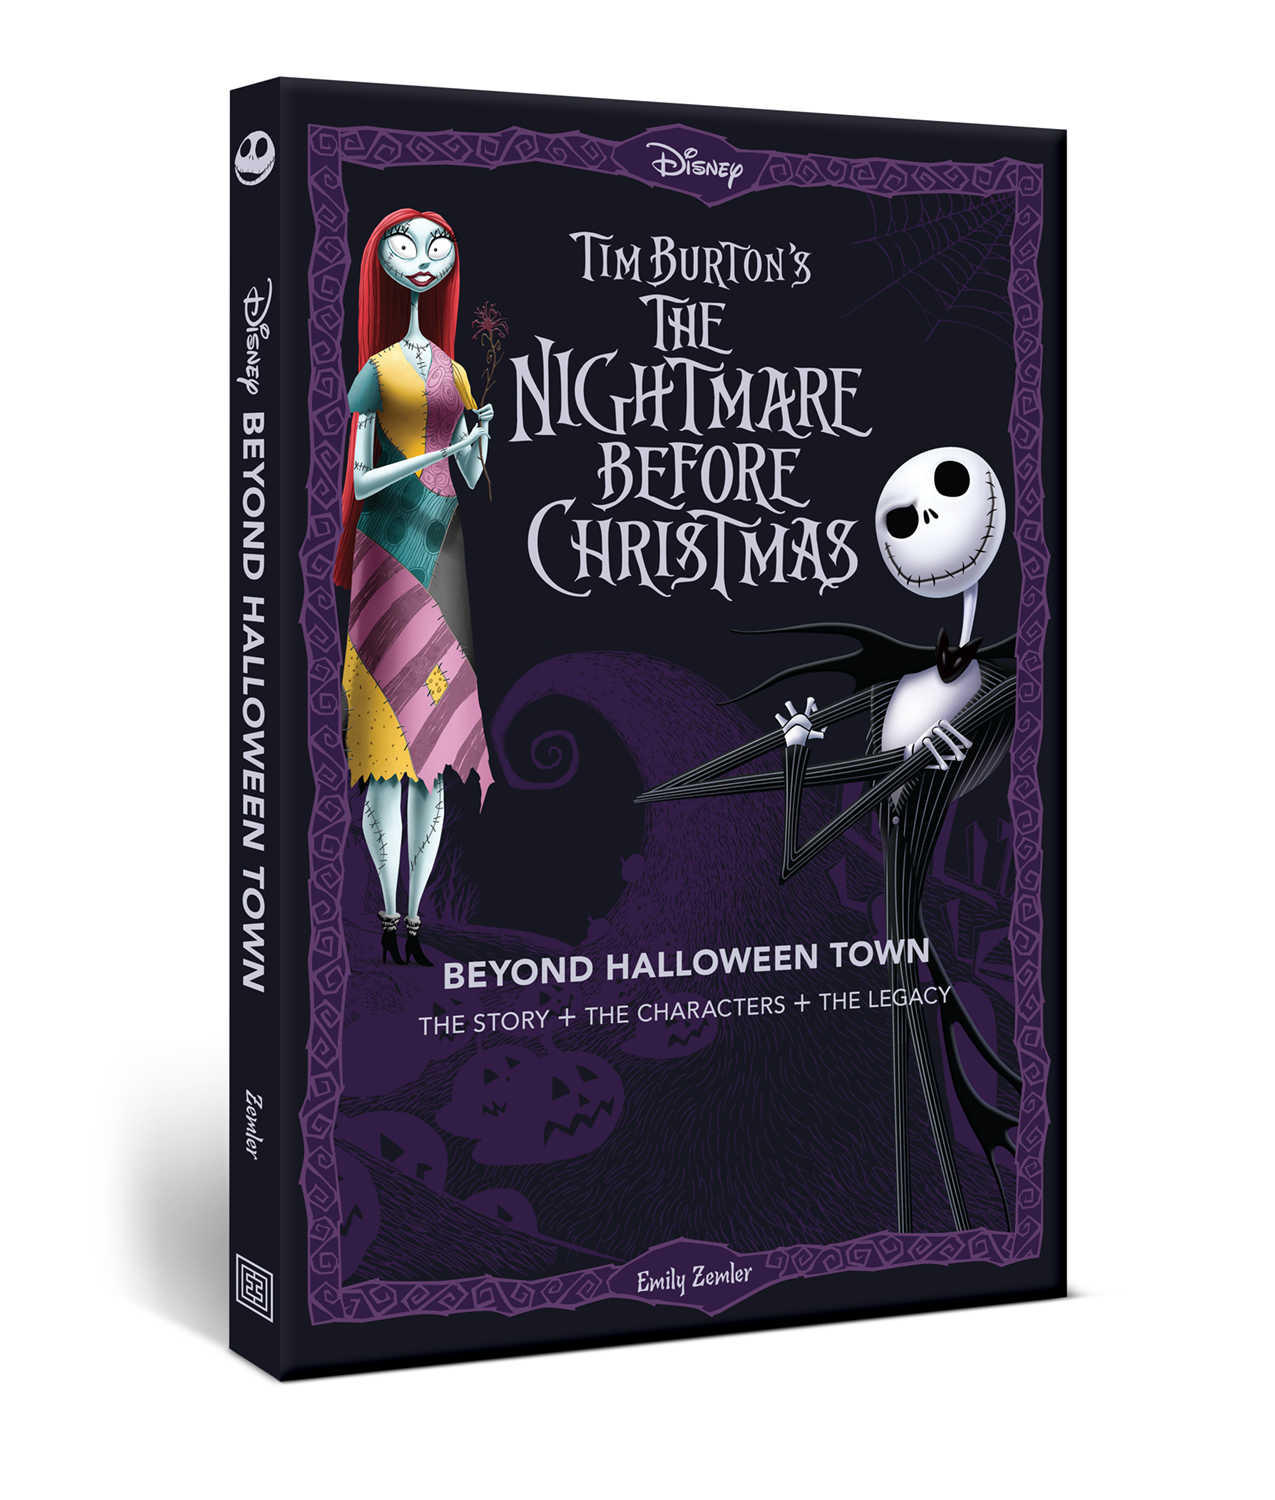 Discover the secrets behind the making of Tim Burton's beloved stop-motion classic in this in-depth look at the film's characters, places, and themes. With exclusive interviews, concept art, and behind-the-scenes photos, Beyond Halloween Town is the ultimate guide for fans of The Nightmare Before Christmas.